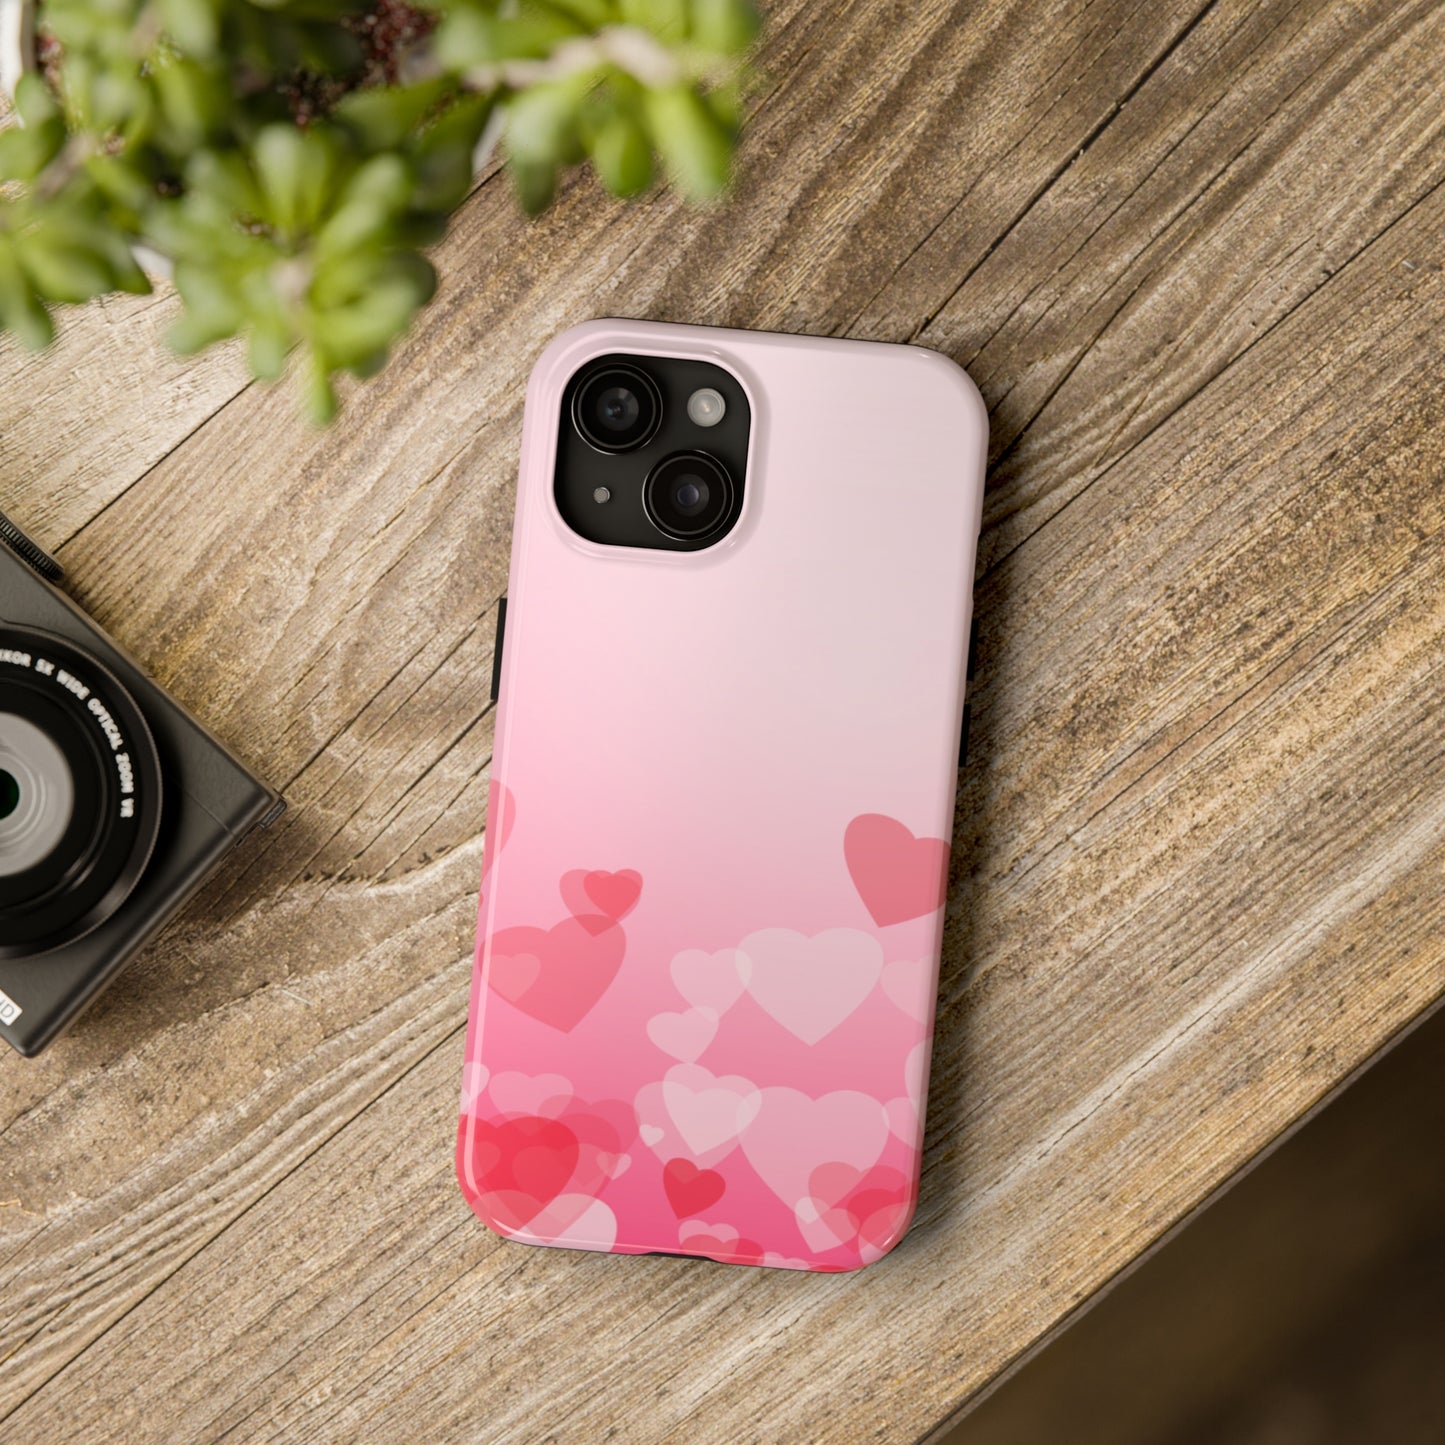 HEARTS iPhone Case